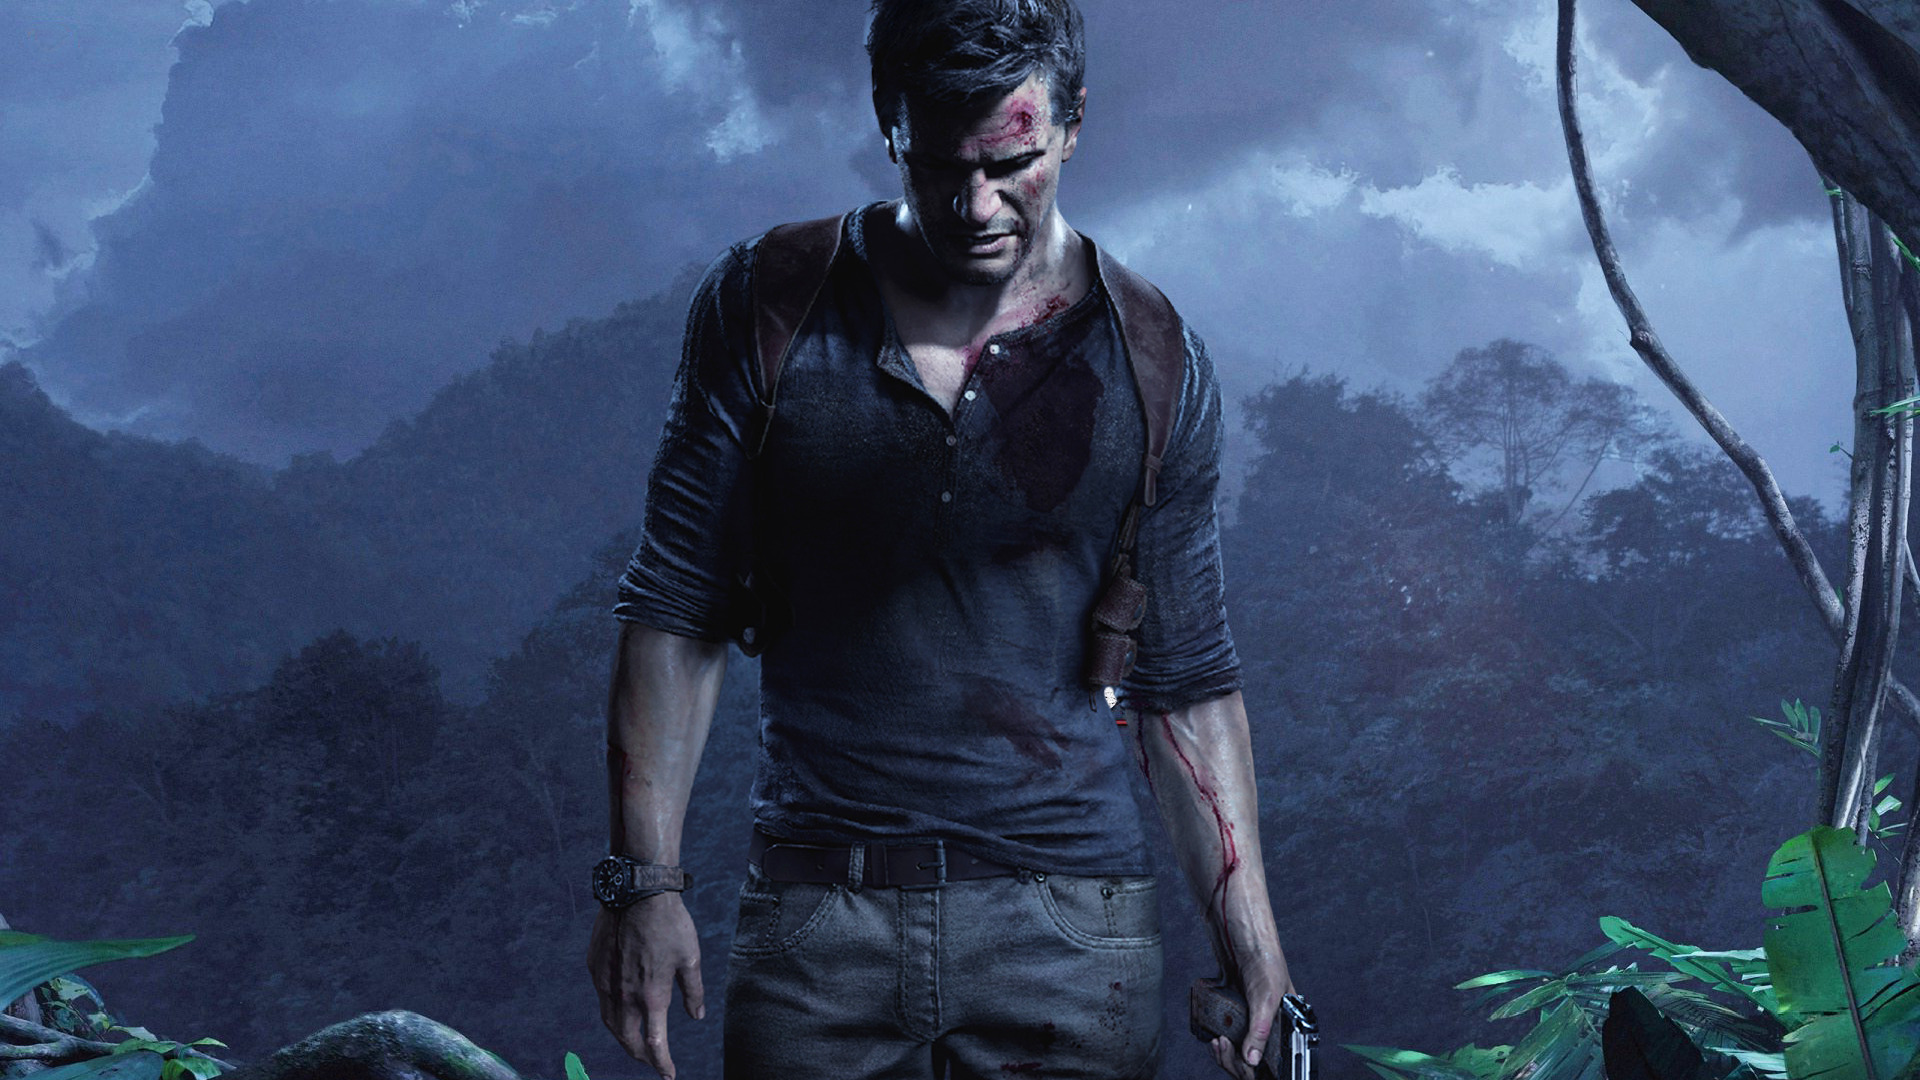 uncharted 2 pc game download